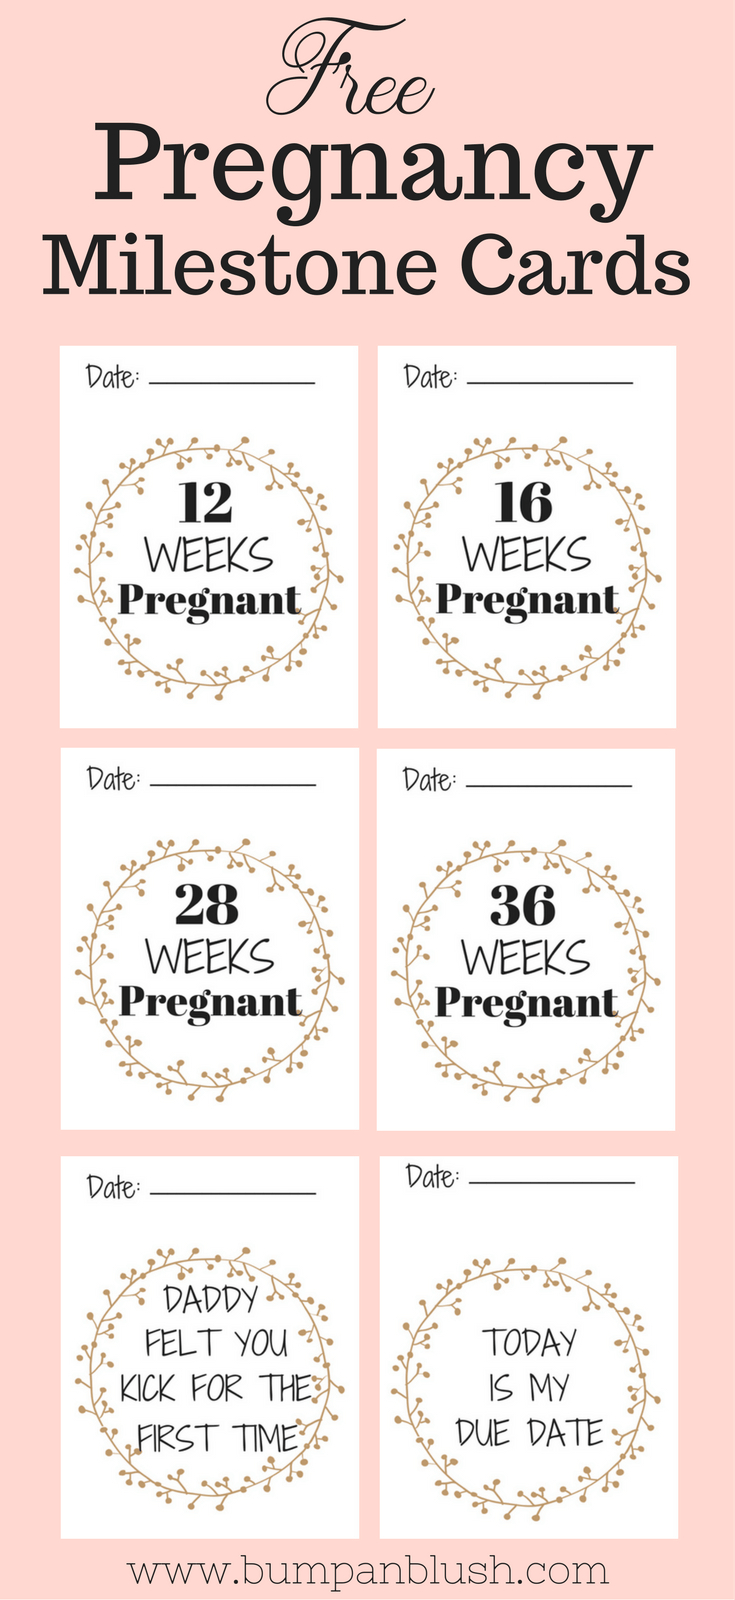 Free Pregnancy Milestone Cards Must Have Pregnancy Announcement 